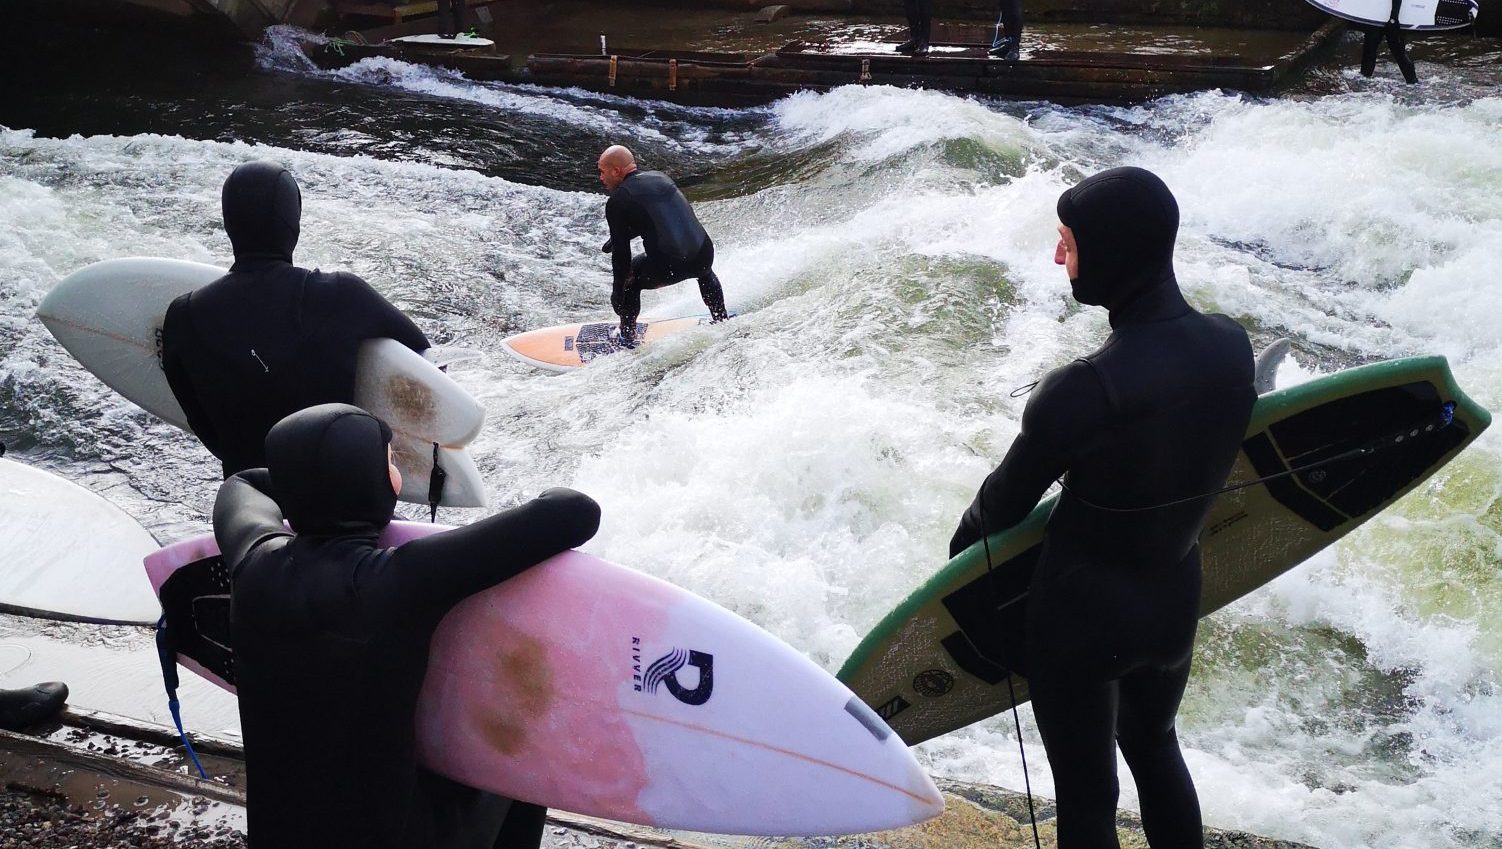 Intrepid surfers ride the wave on the Eisbach River in the heart of Munich. Photo: Deborah Nash